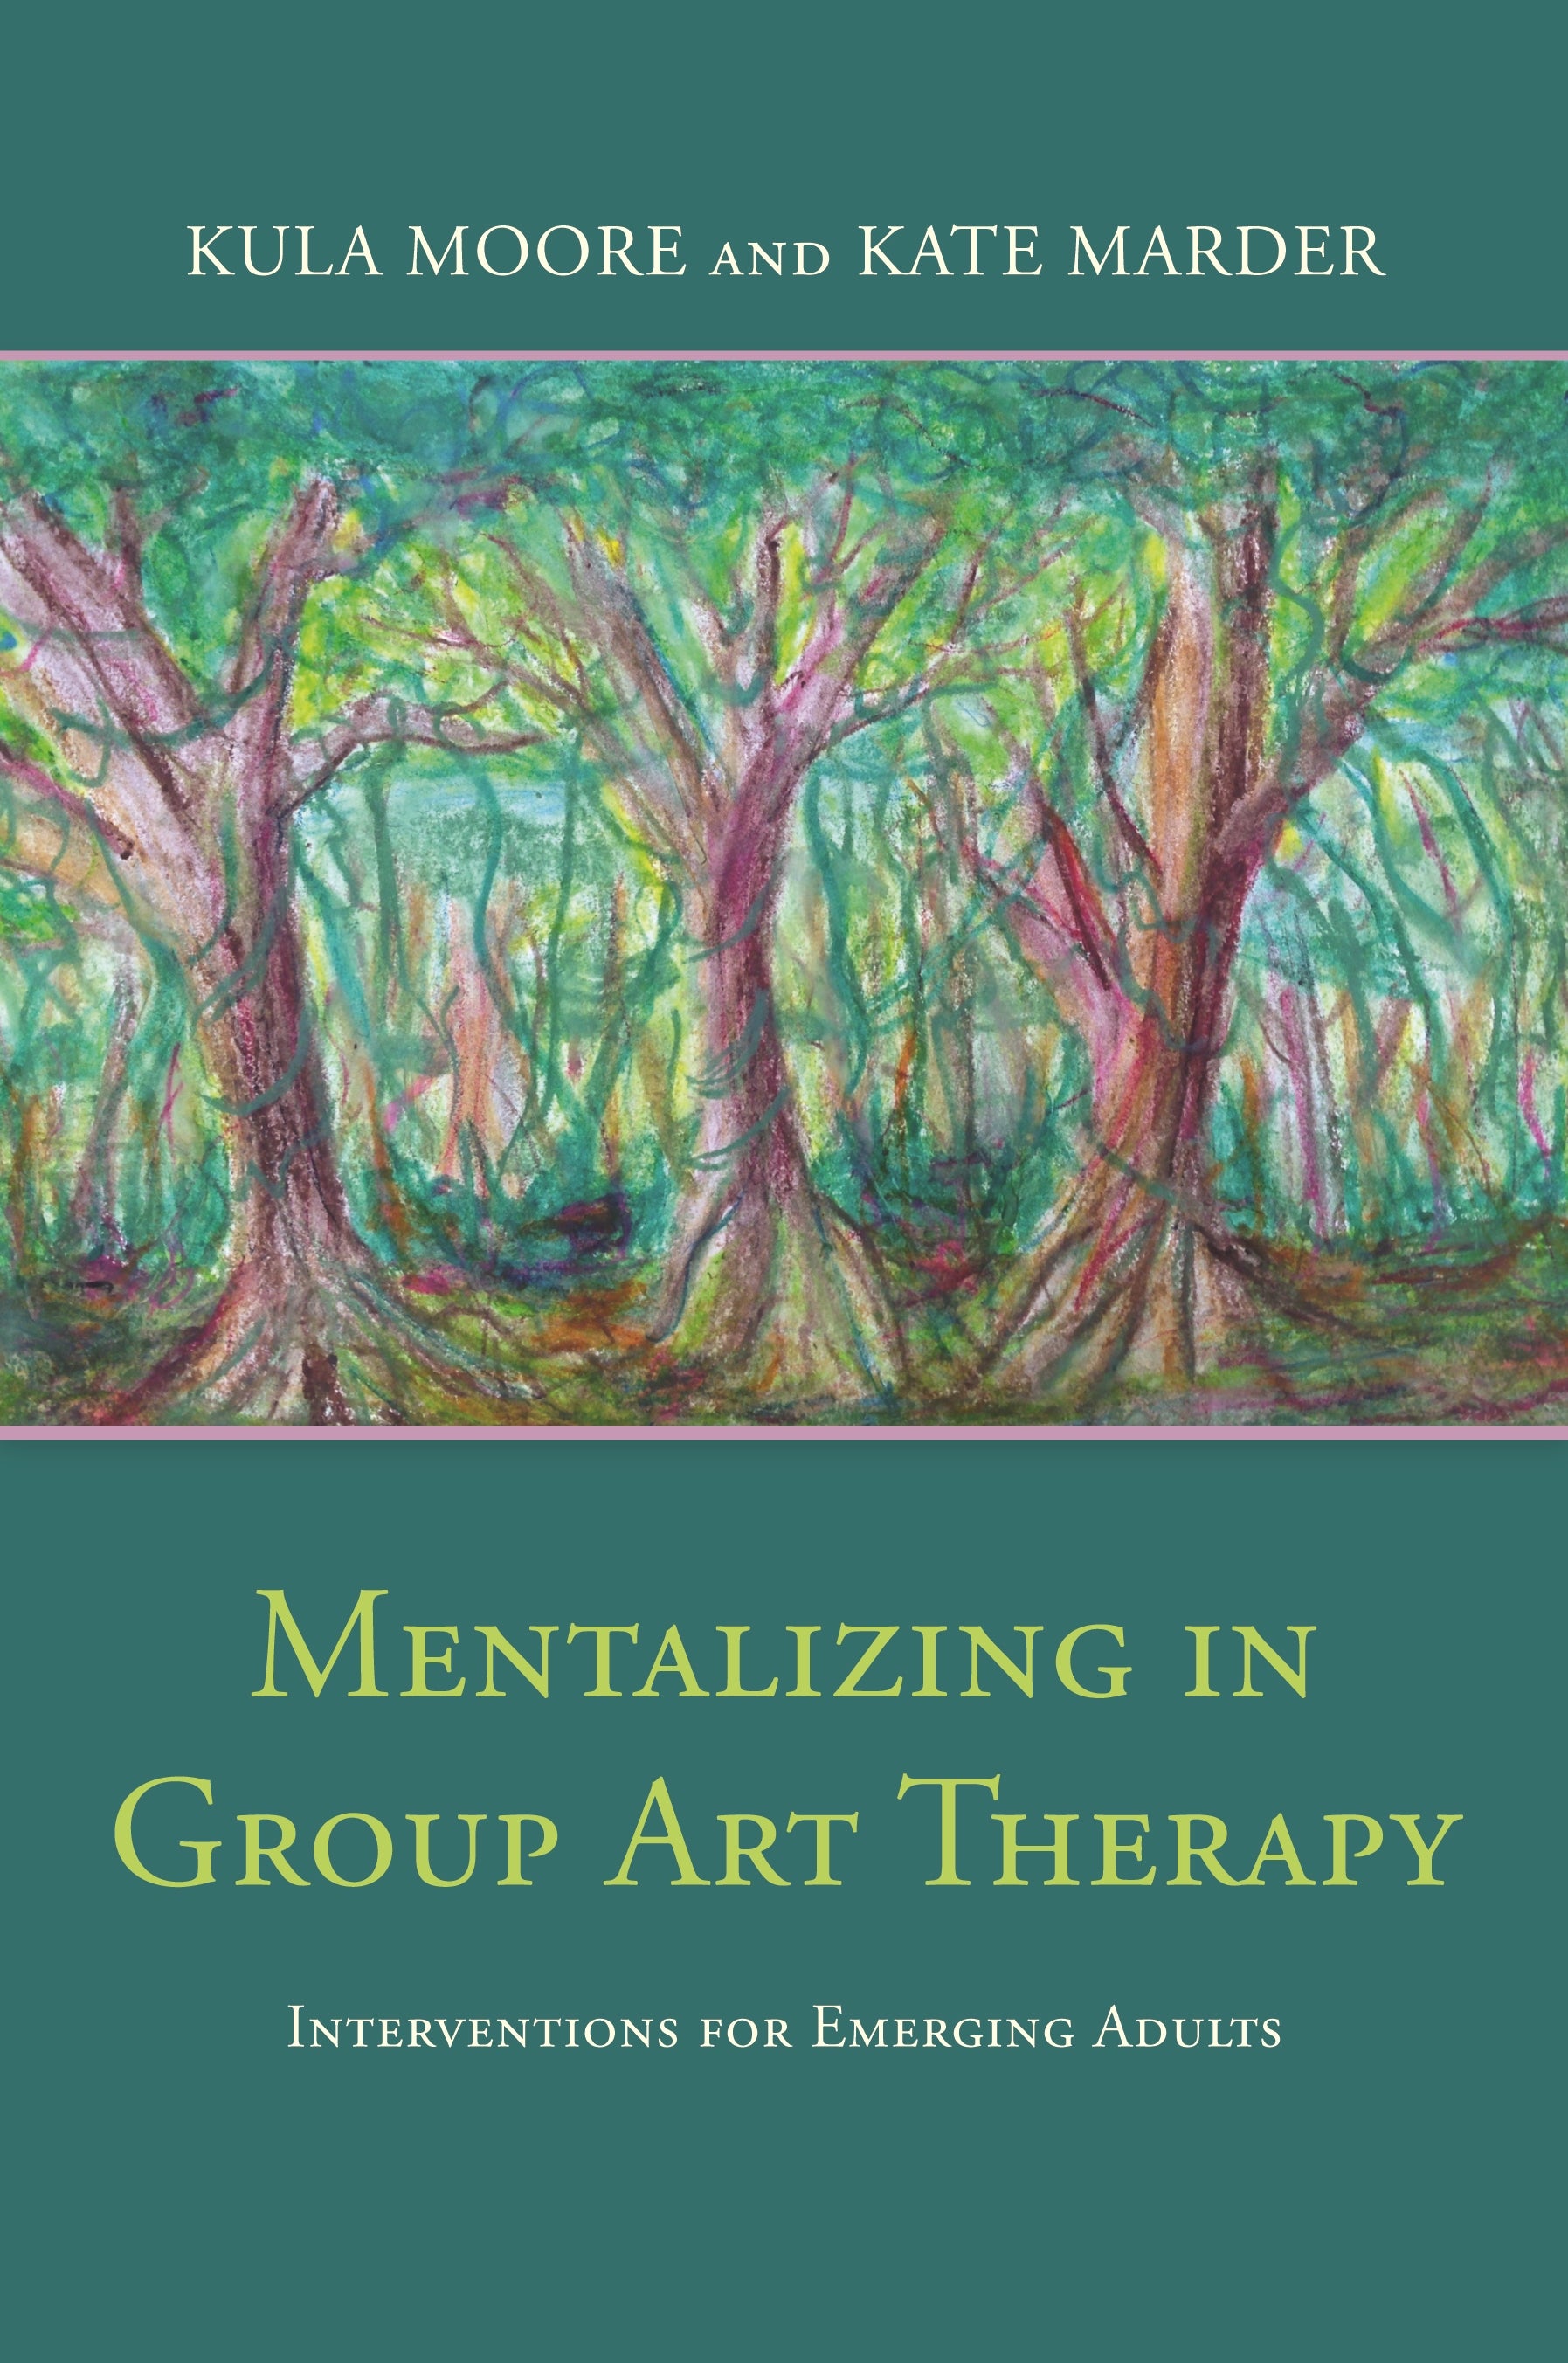 Mentalizing in Group Art Therapy by Kula Moore, Kate Marder